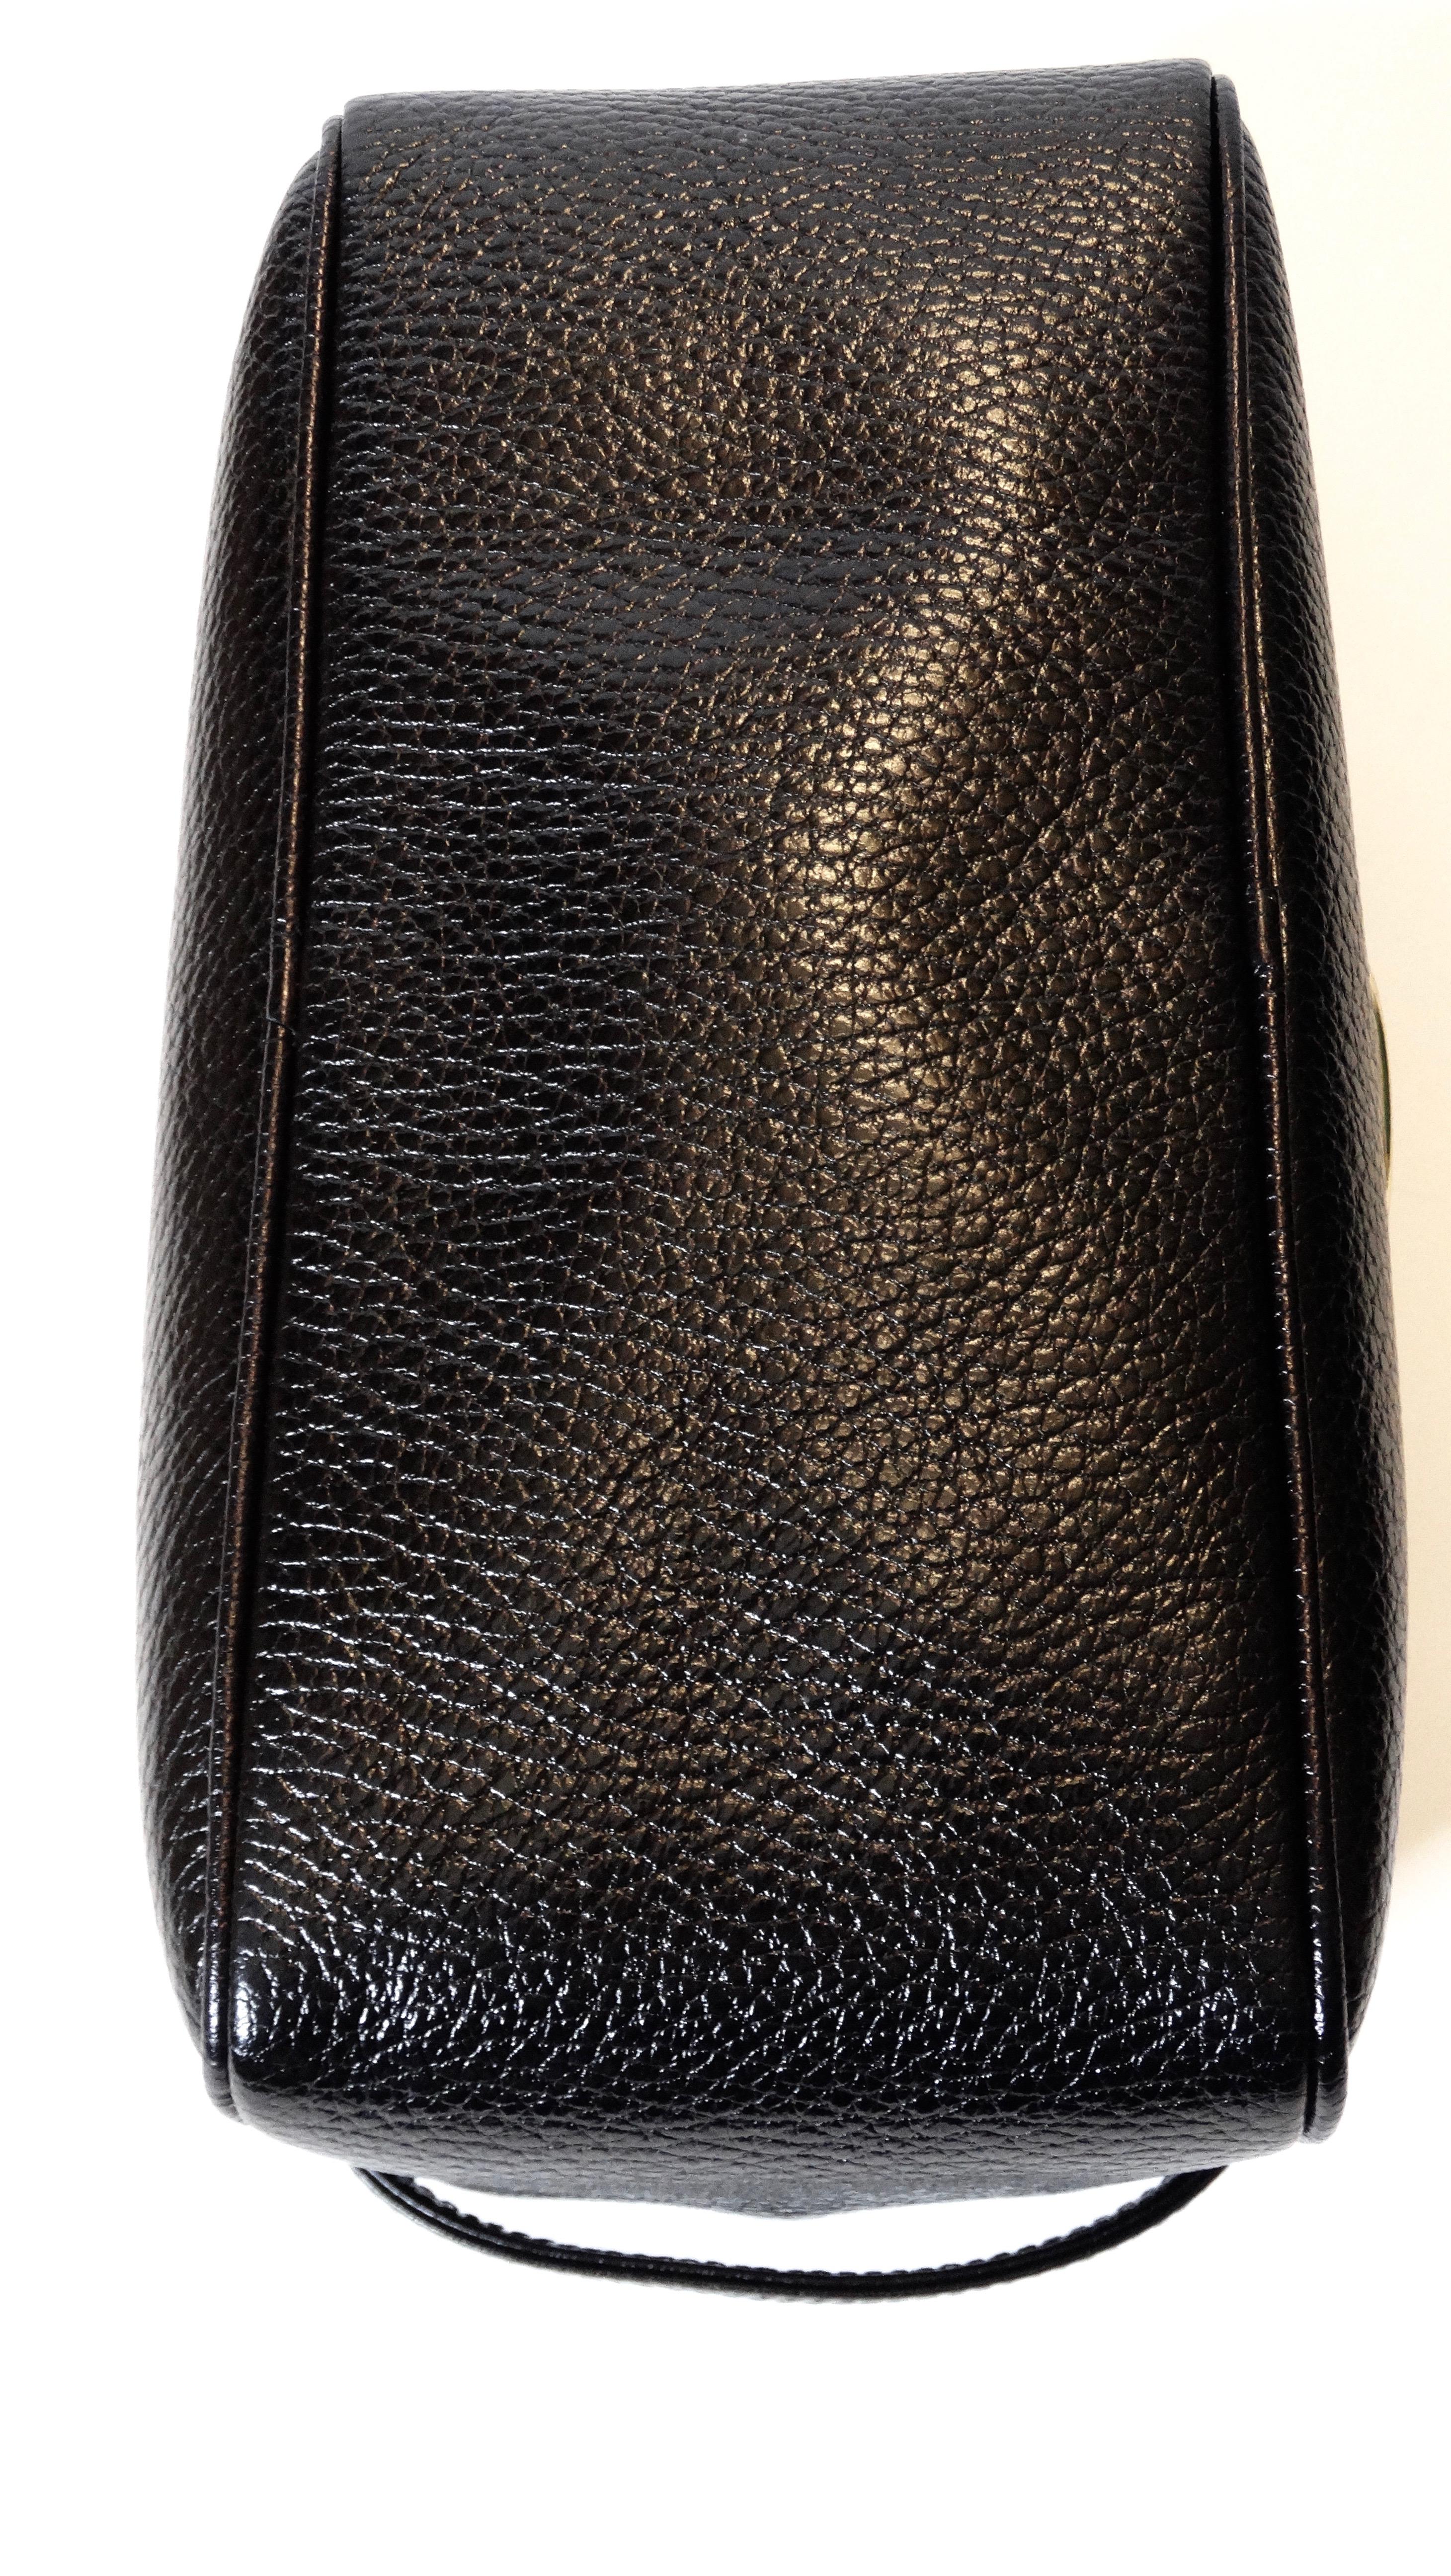 Gianni Versace 1990s Black Leather Cosmetic Bag 3